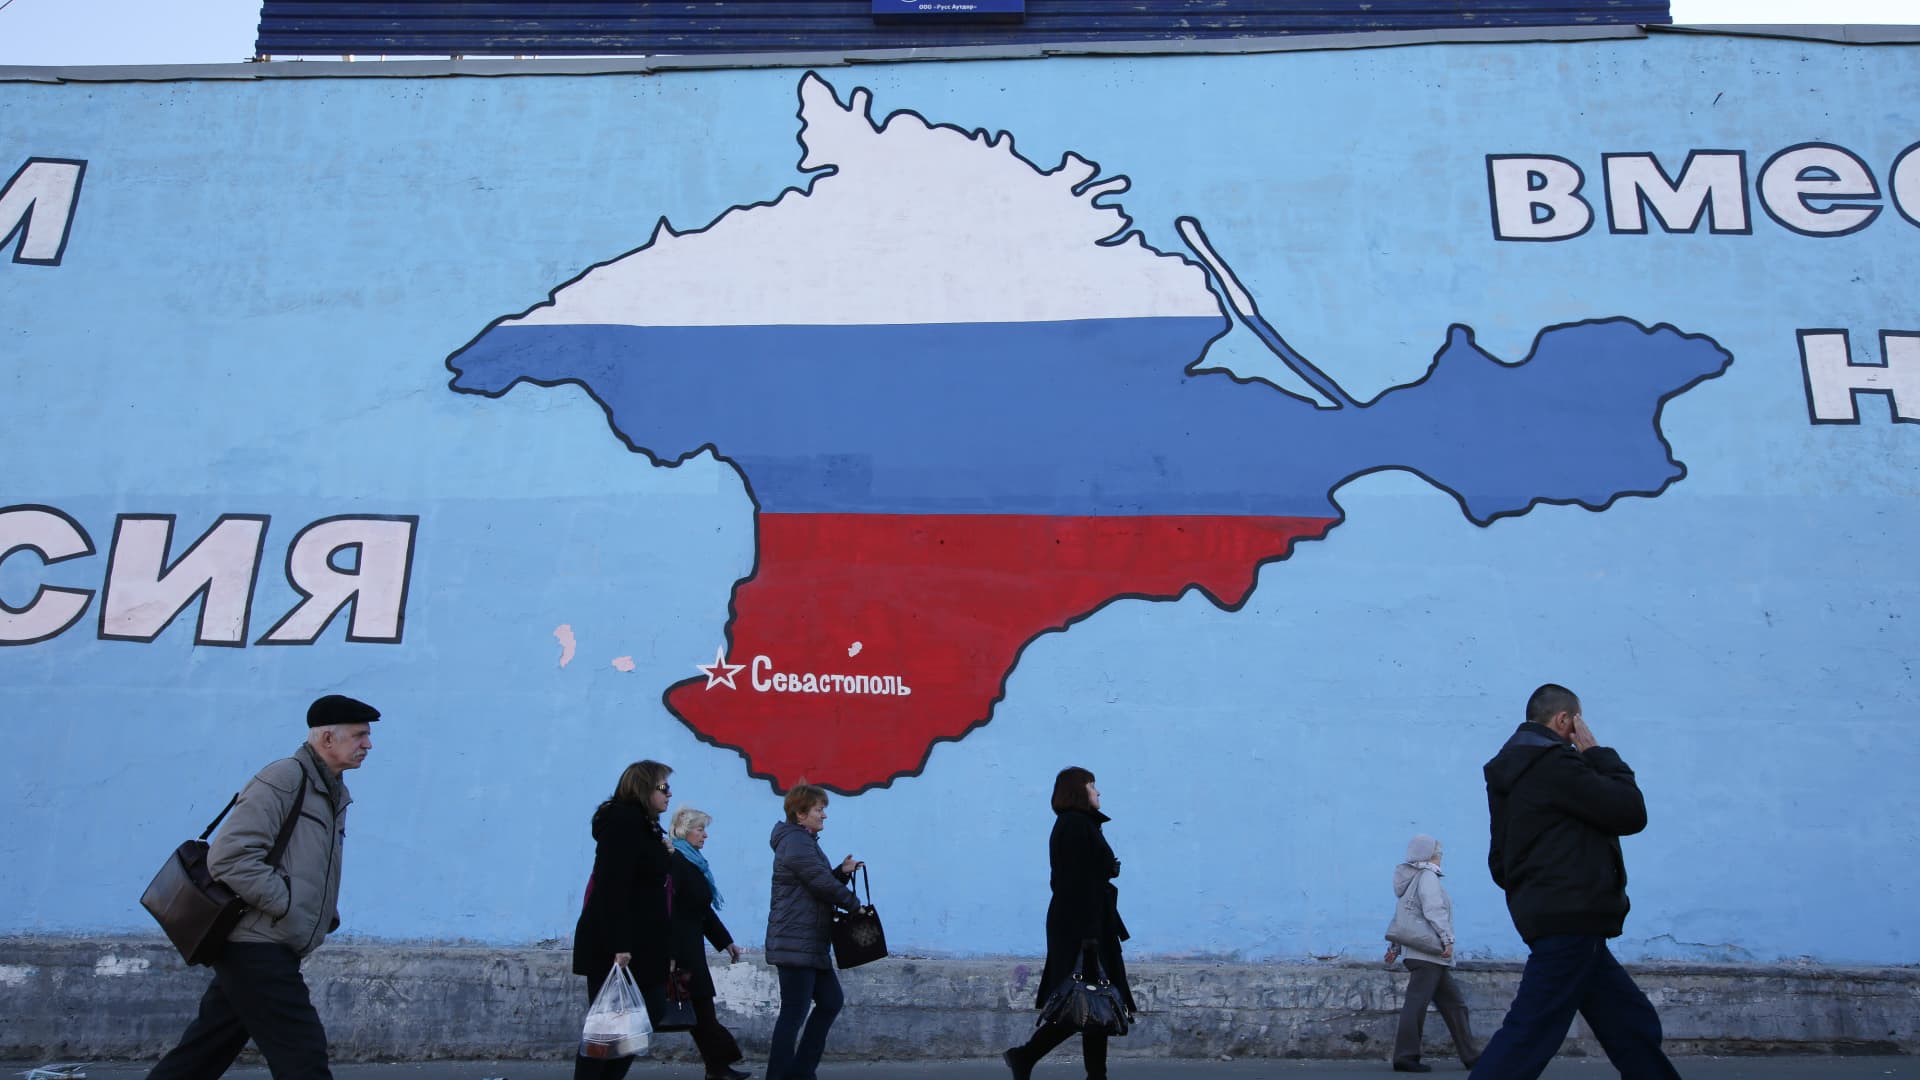 Pedestrians pass a giant wall mural showing a map of the Crimean peninsula filled with the flag of the Russian Federation, in support of the Russian annexation, in Moscow, Russia, on Friday, March 28, 2014.